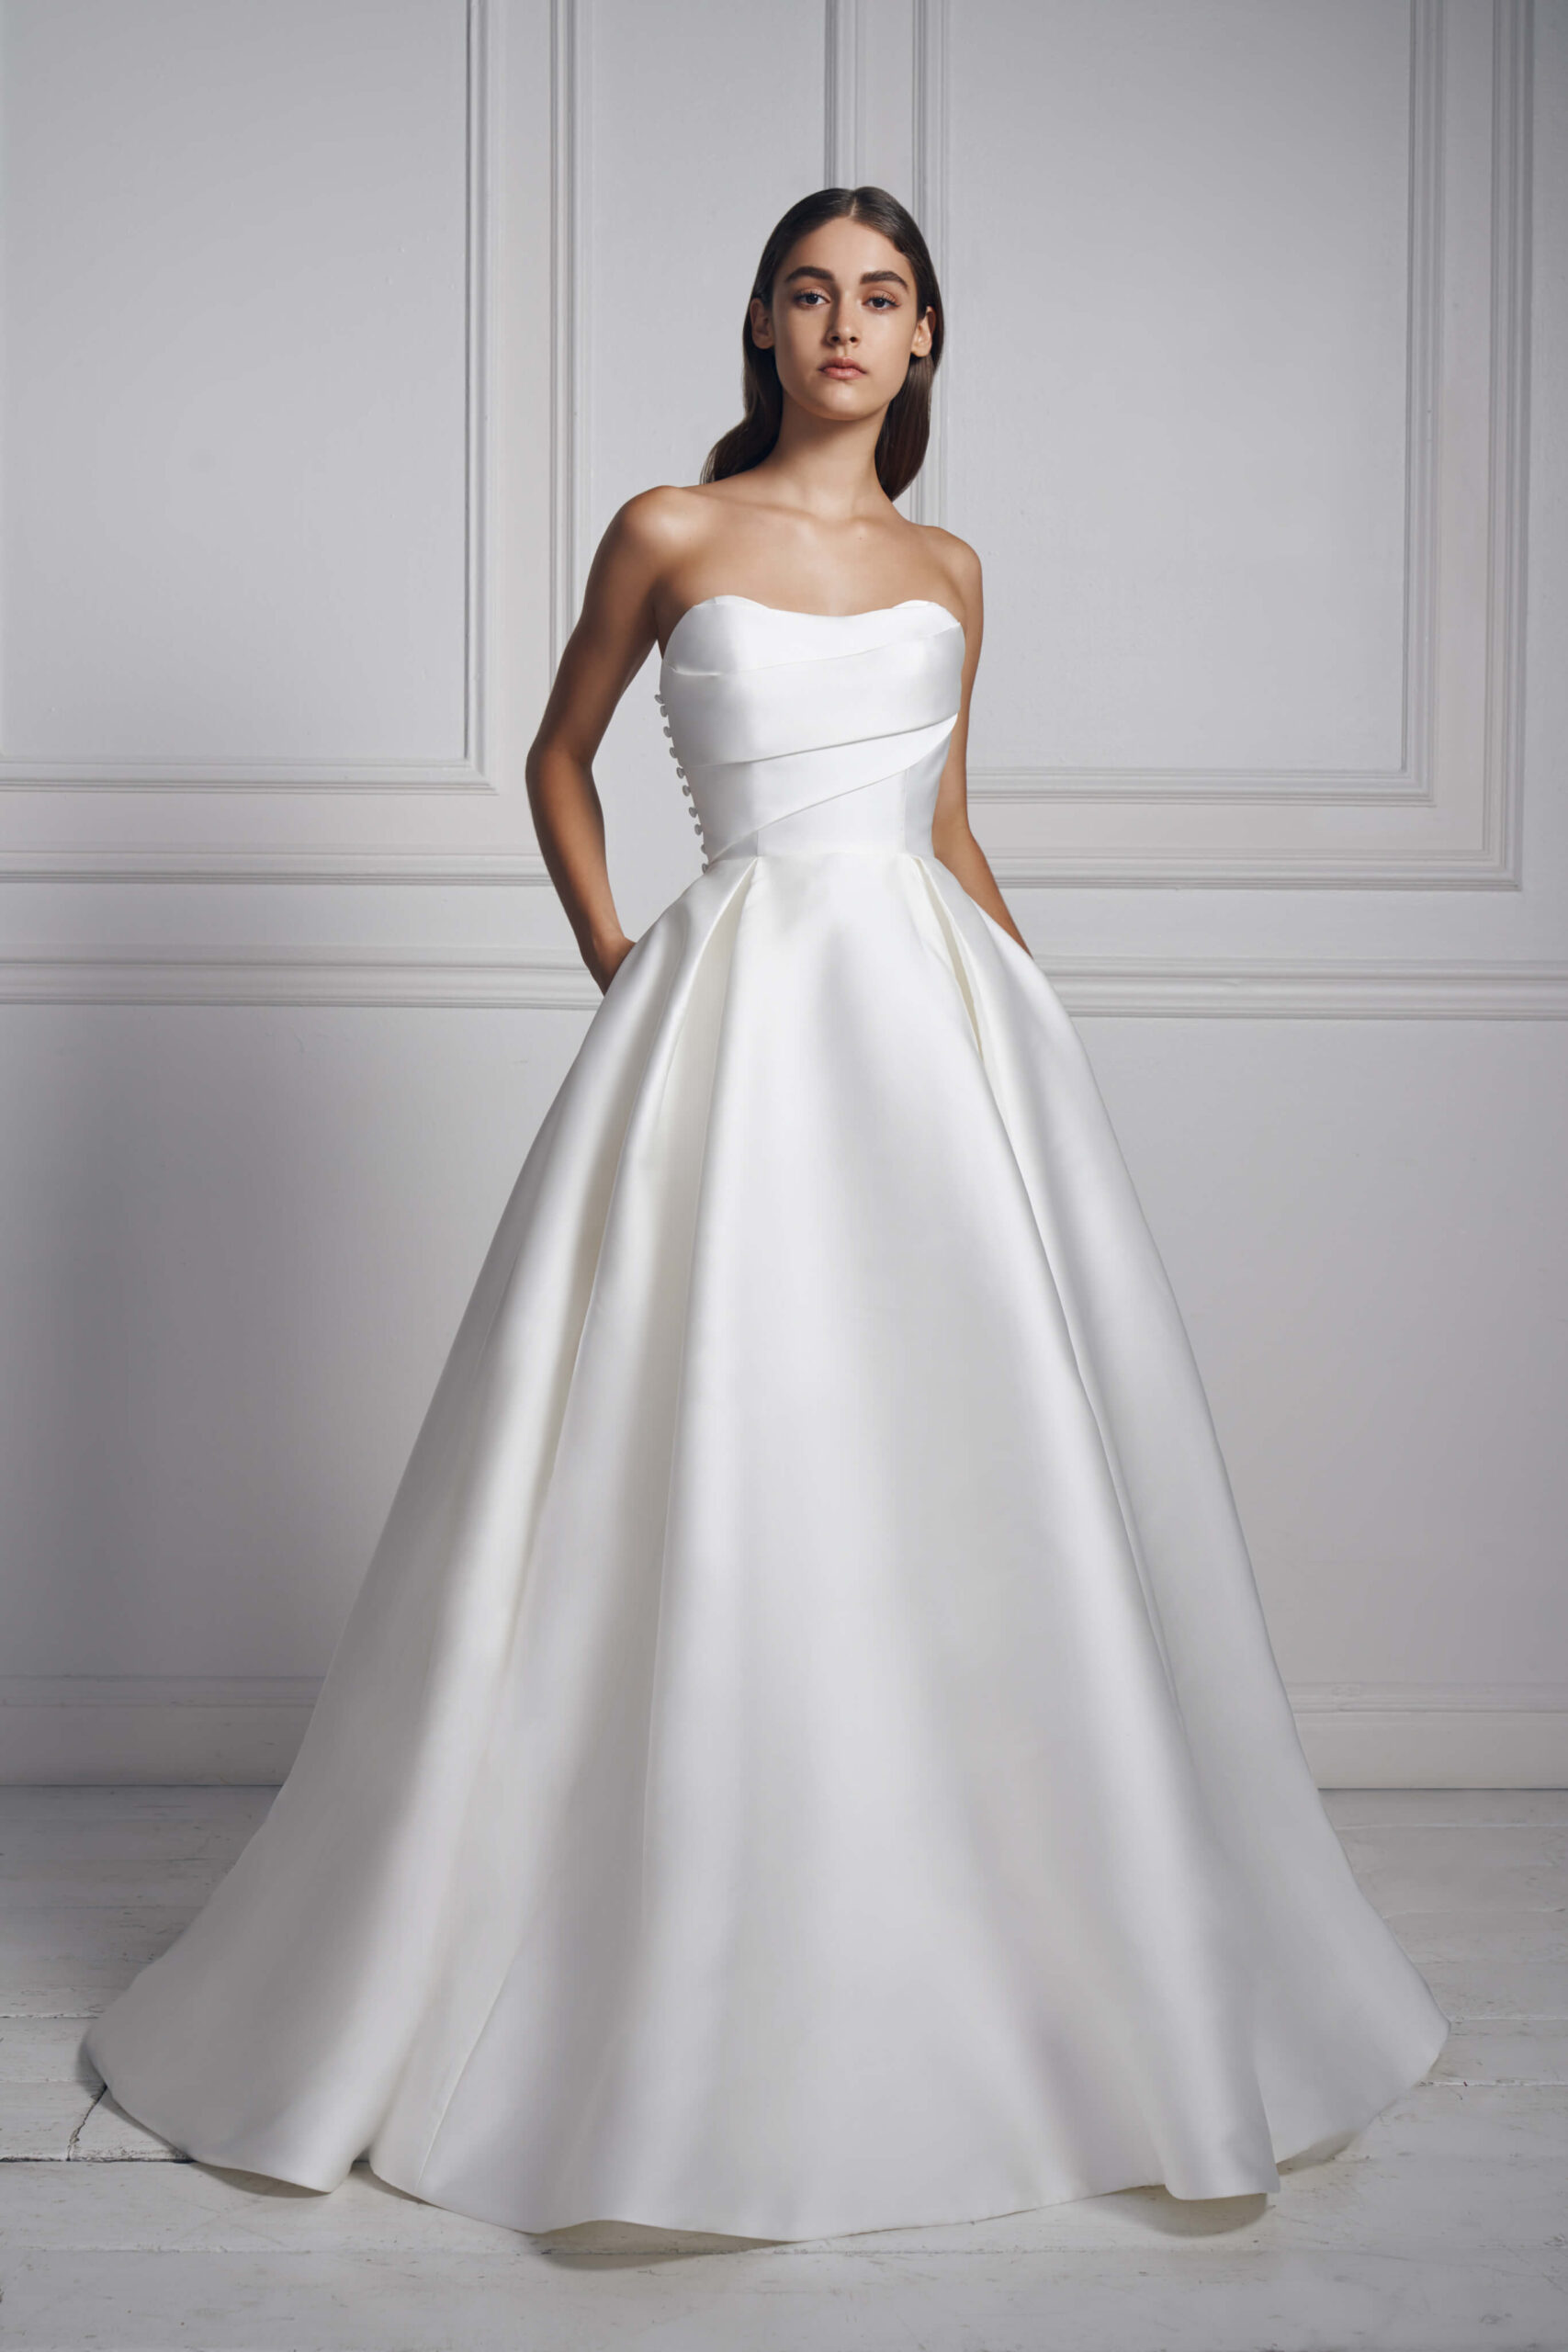 Strapless white silk ball gown by Anne Barge. This classic ball gown is adorned with buttons.